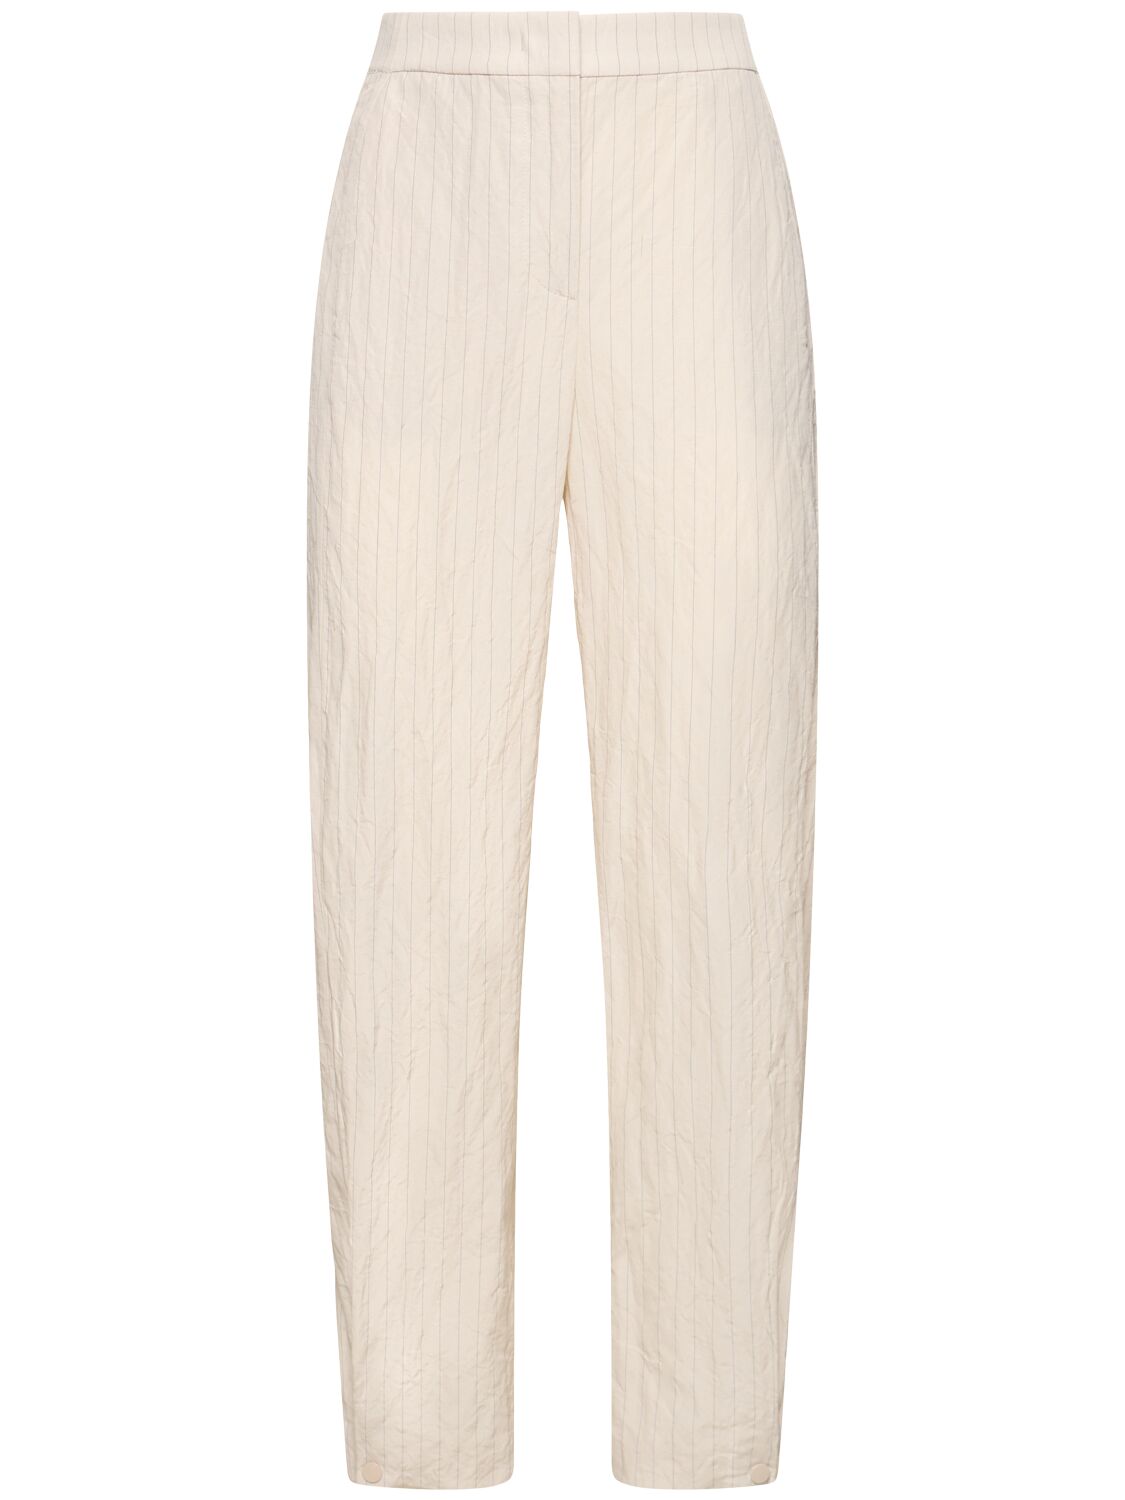 Image of Cotton Blend Striped High Rise Pants